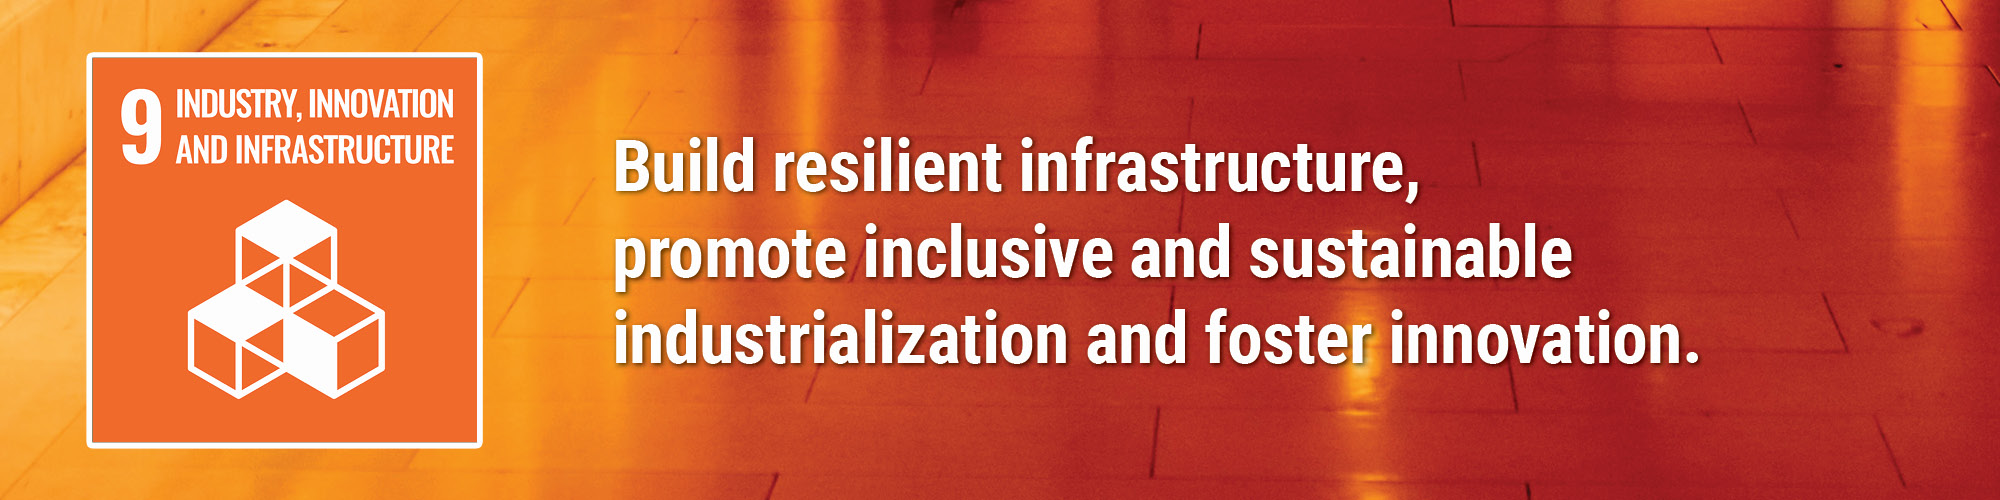 Build resilient infrastructure, promote inclusive and sustainable industrialization and foster innovation.